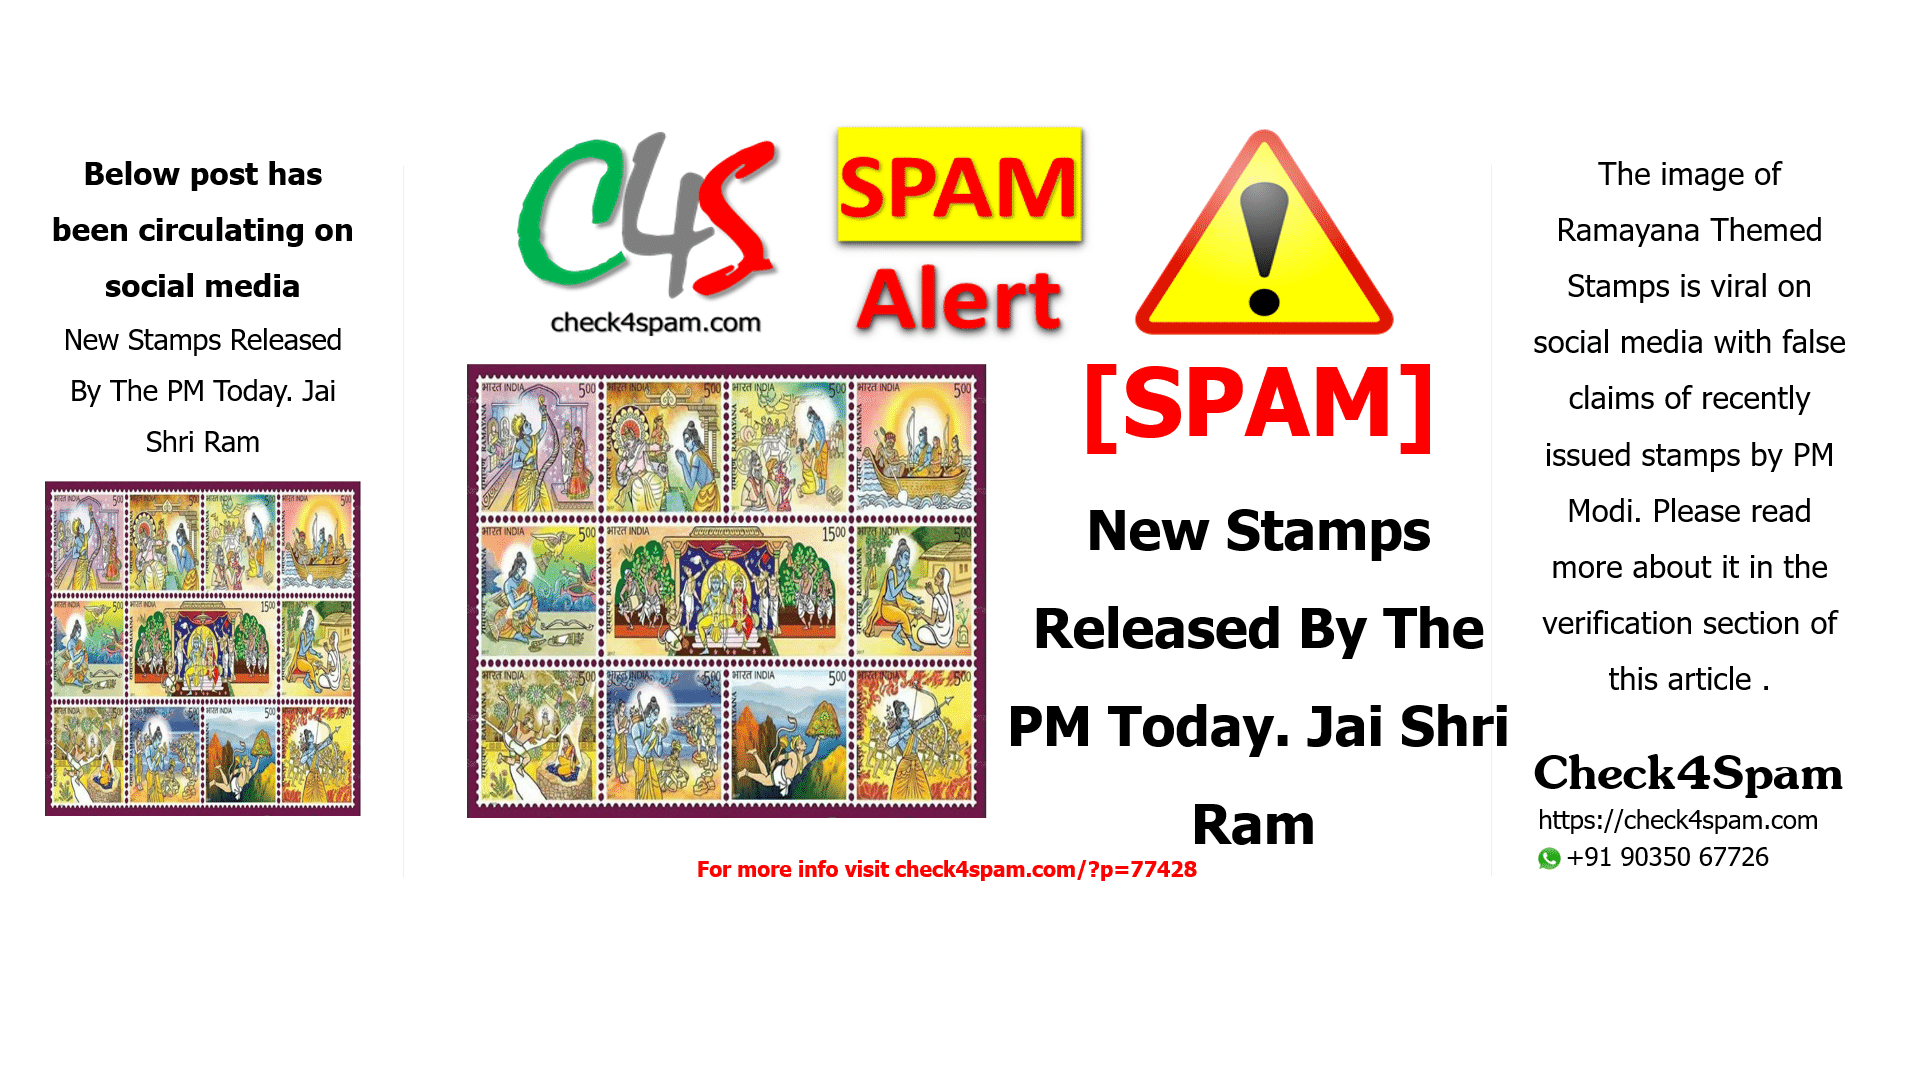 New Stamps Released By The PM Today. Jai Shri Ram